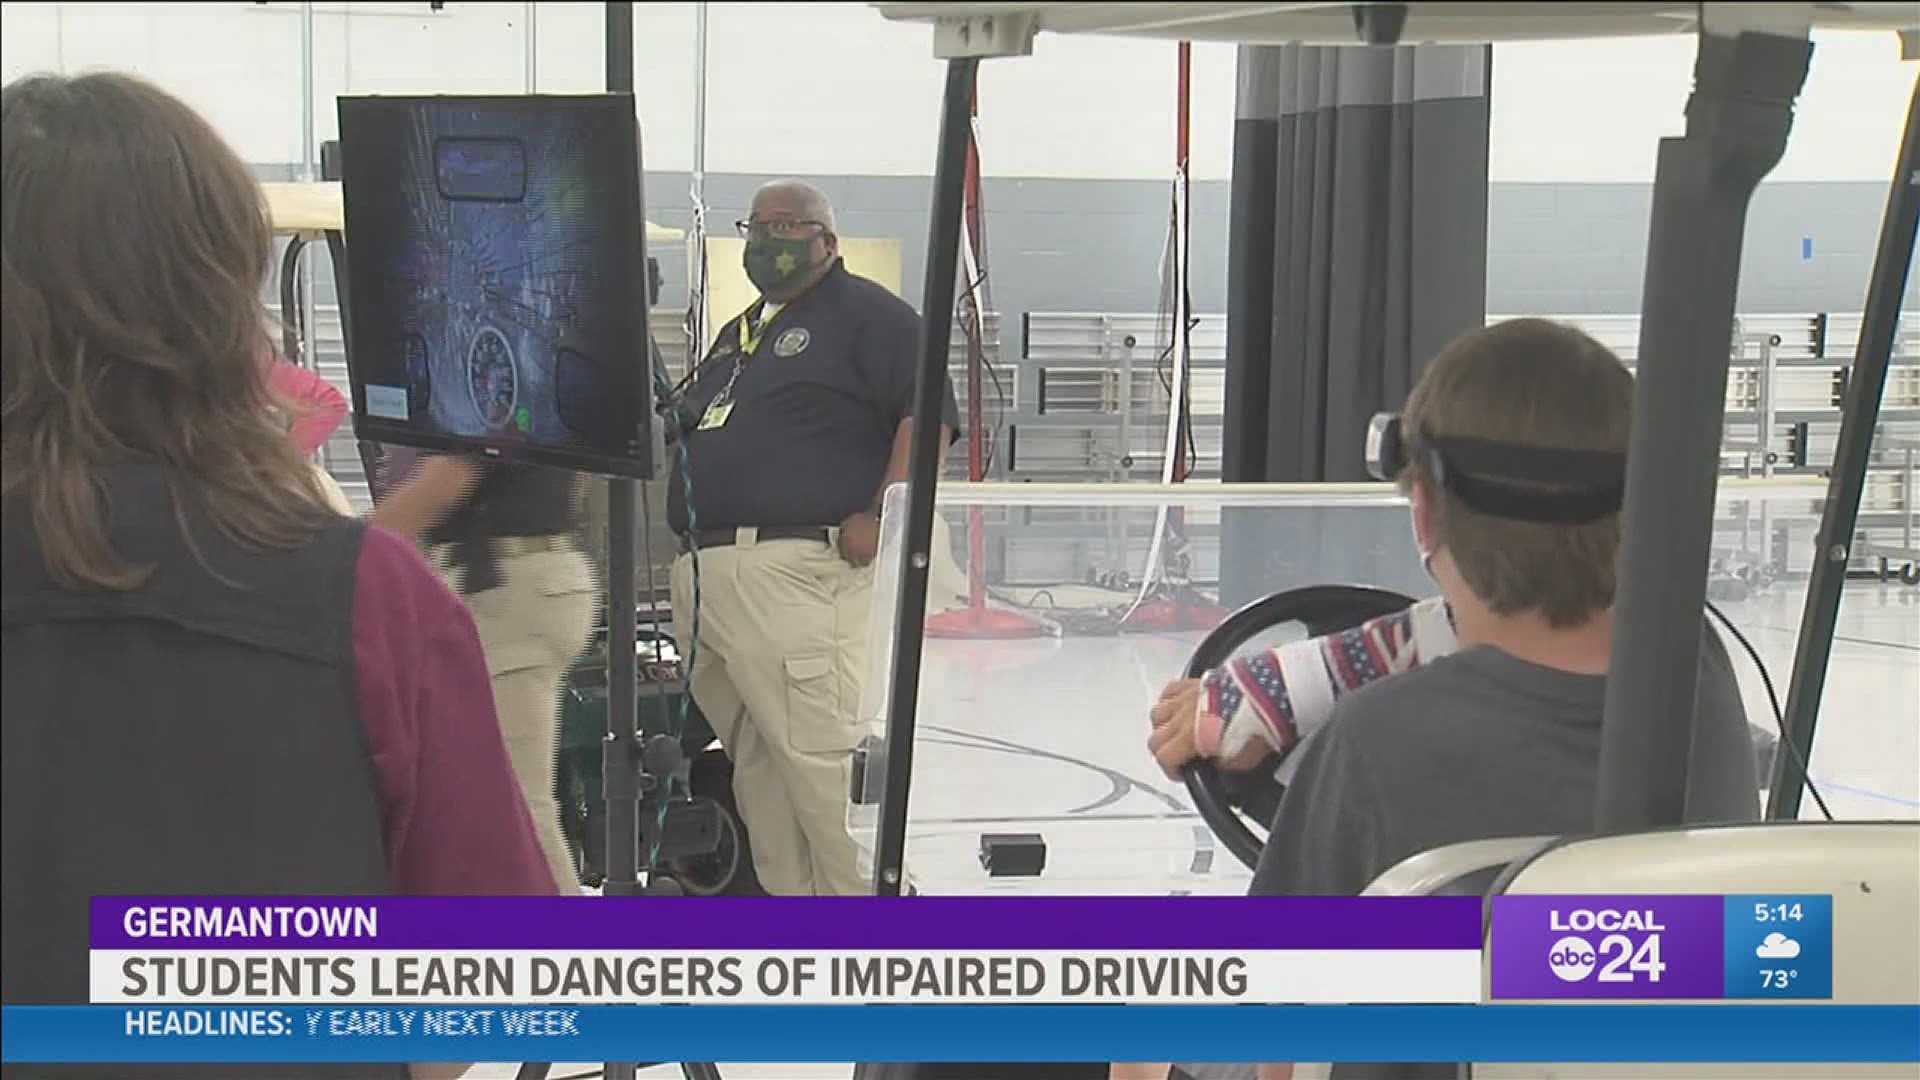 The Tennessee Highway Safety Office brought the "Arrive Alive" tour to Houston High students Tuesday.